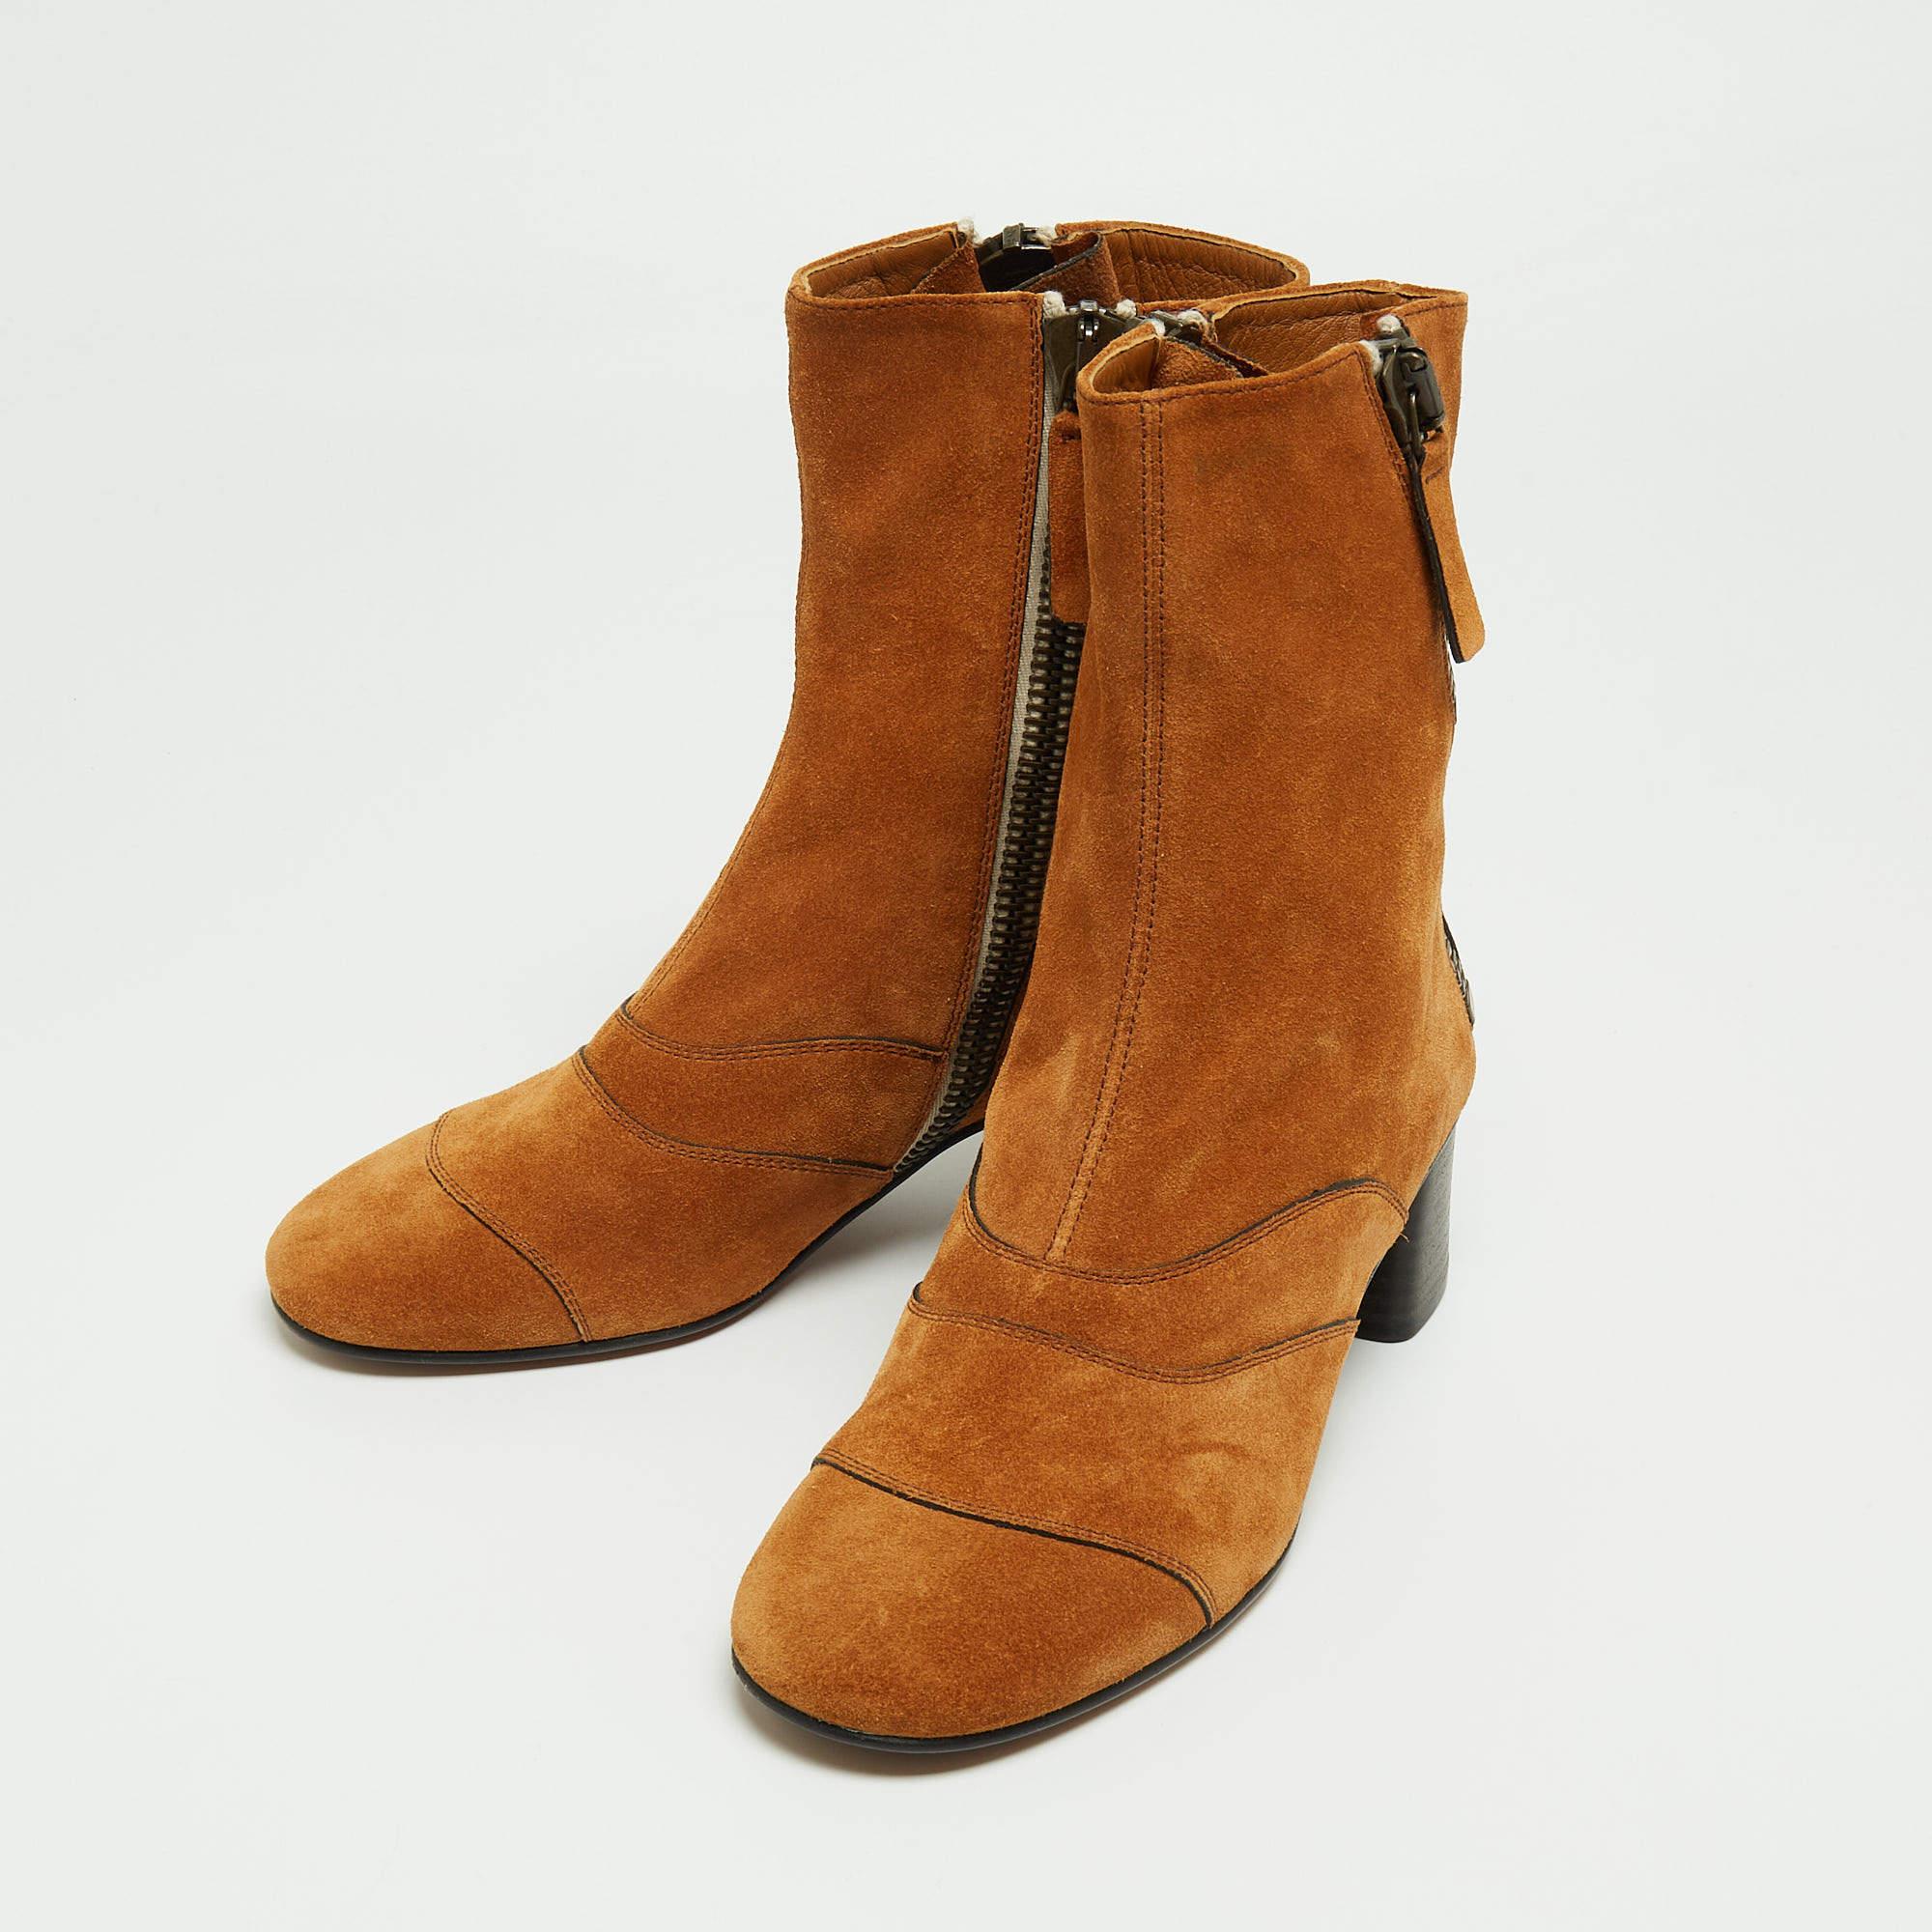 Chloe Brown Suede Ankle Boots Size 36 3